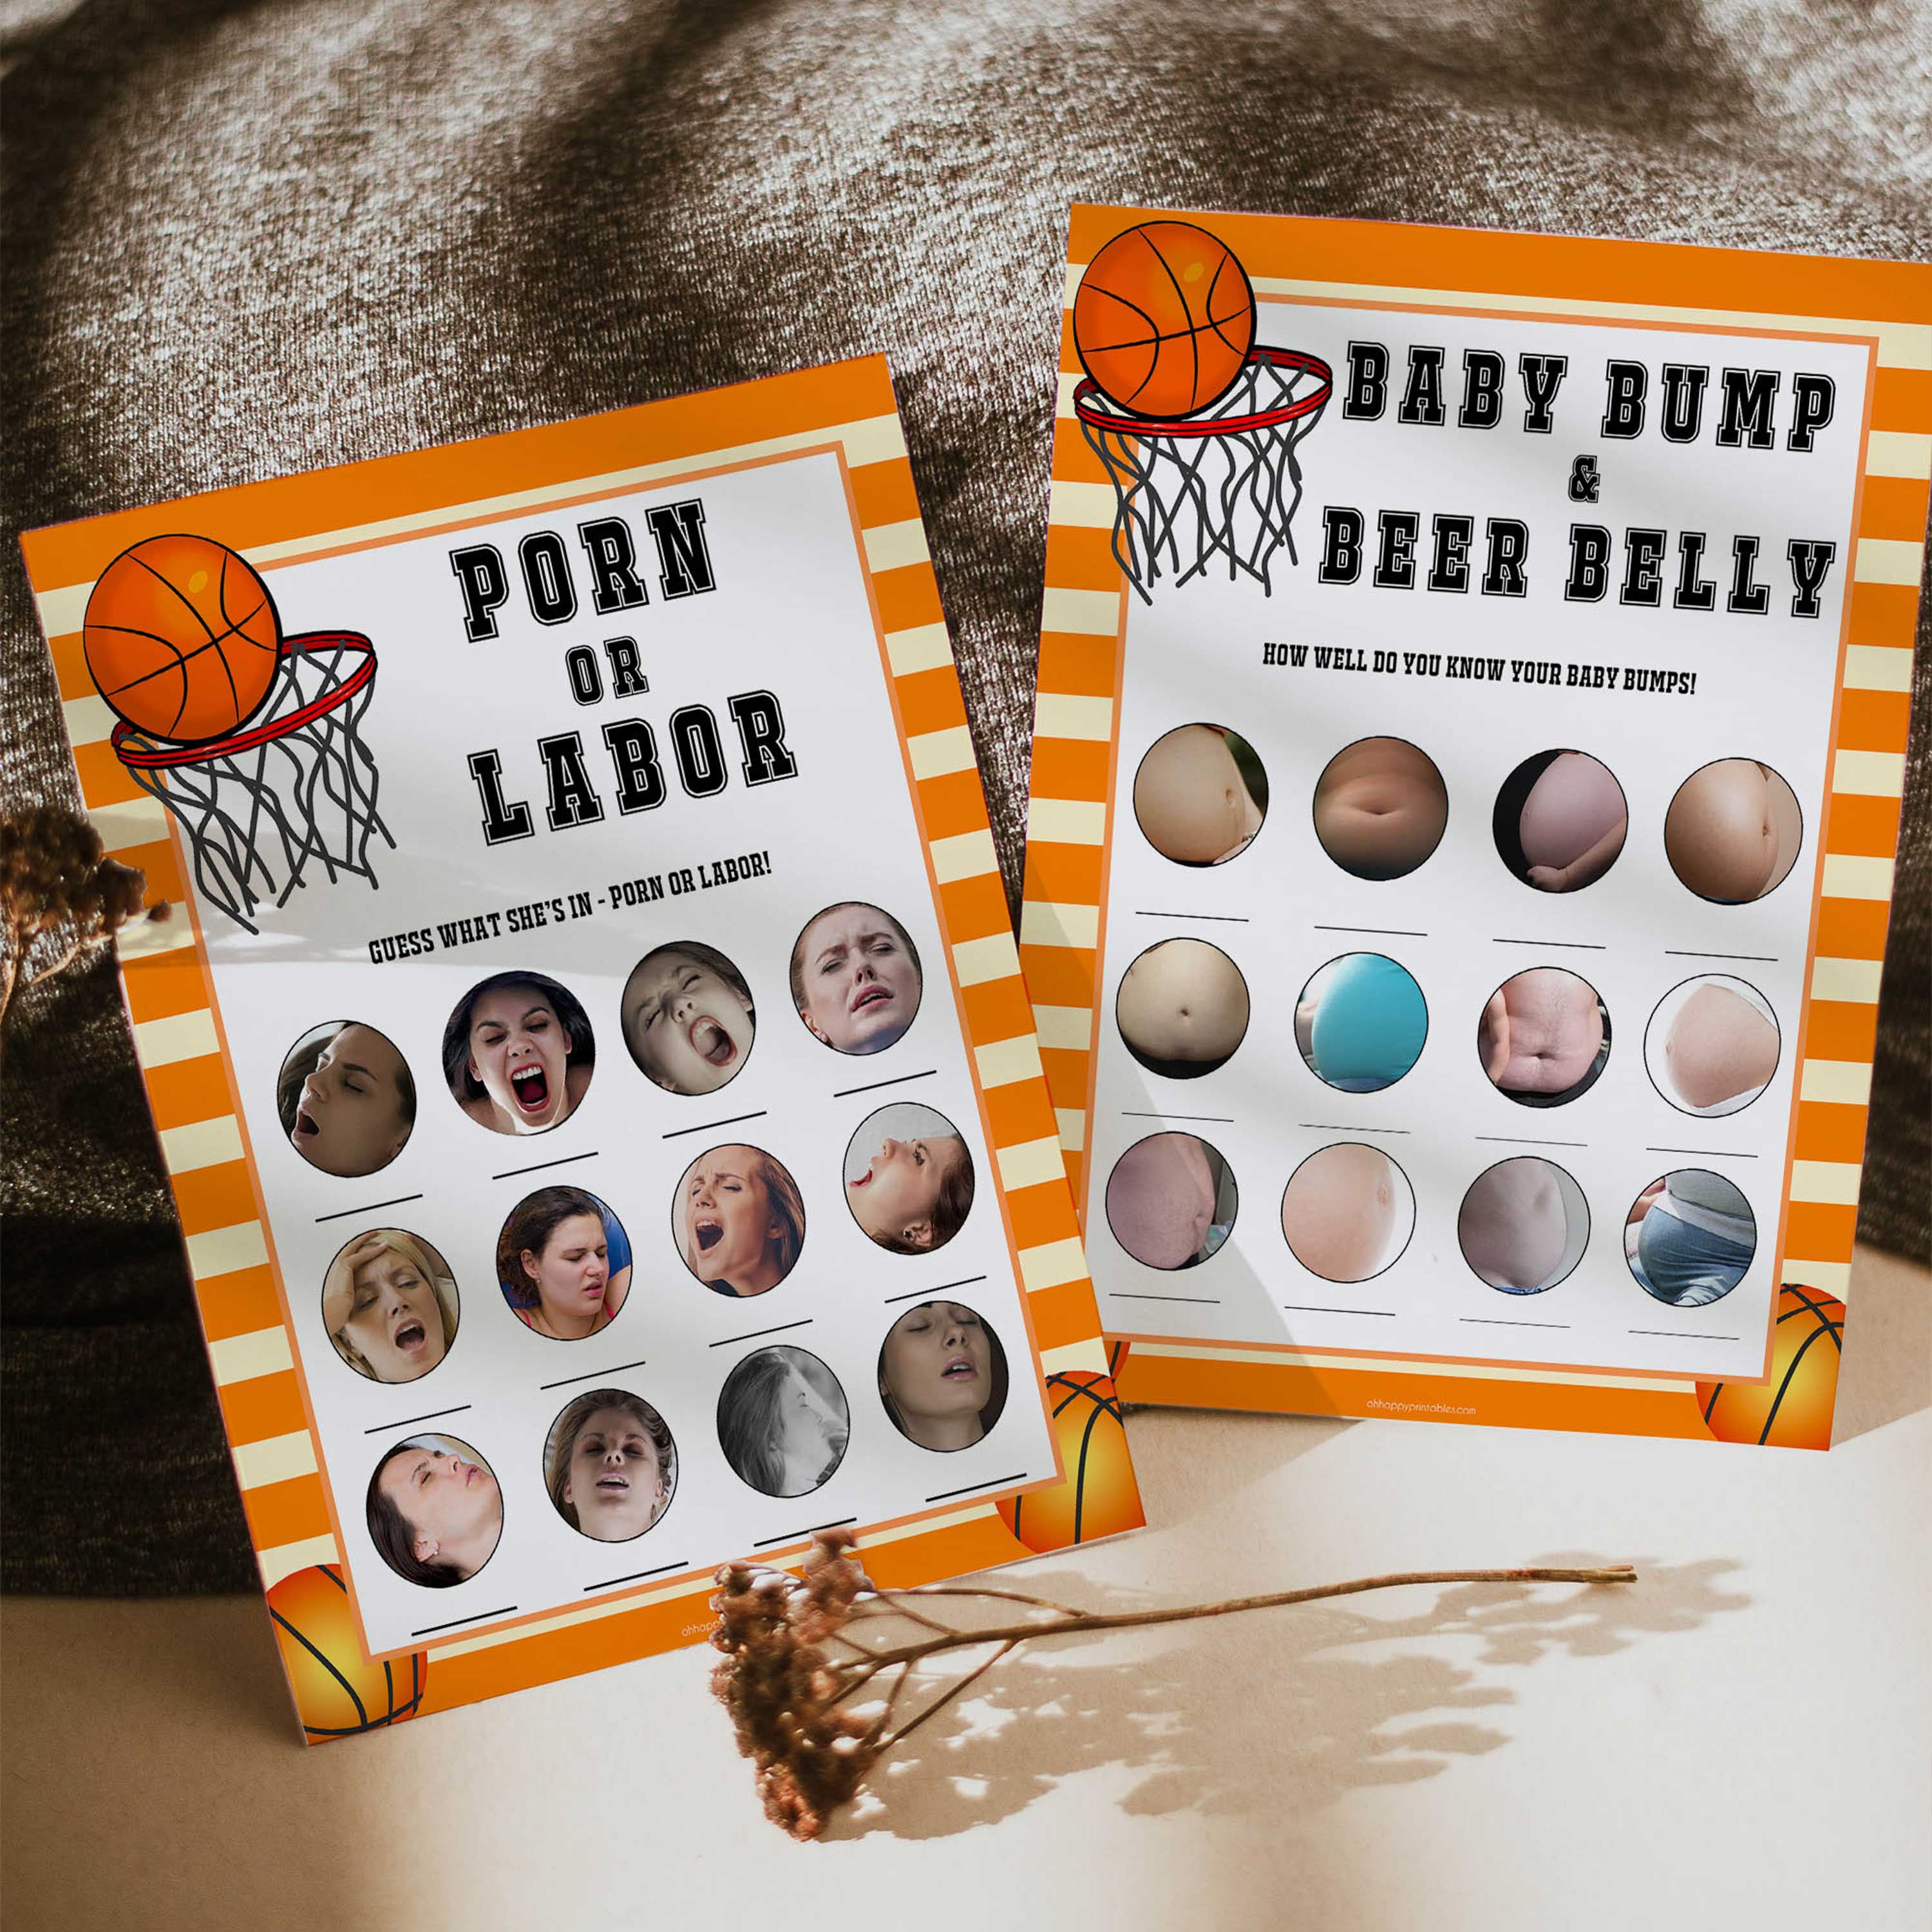 labor or porn, baby bump or beer belly game, Printable baby shower games, basketball fun baby games, baby shower games, fun baby shower ideas, top baby shower ideas, basketball baby shower, basketball baby shower ideas